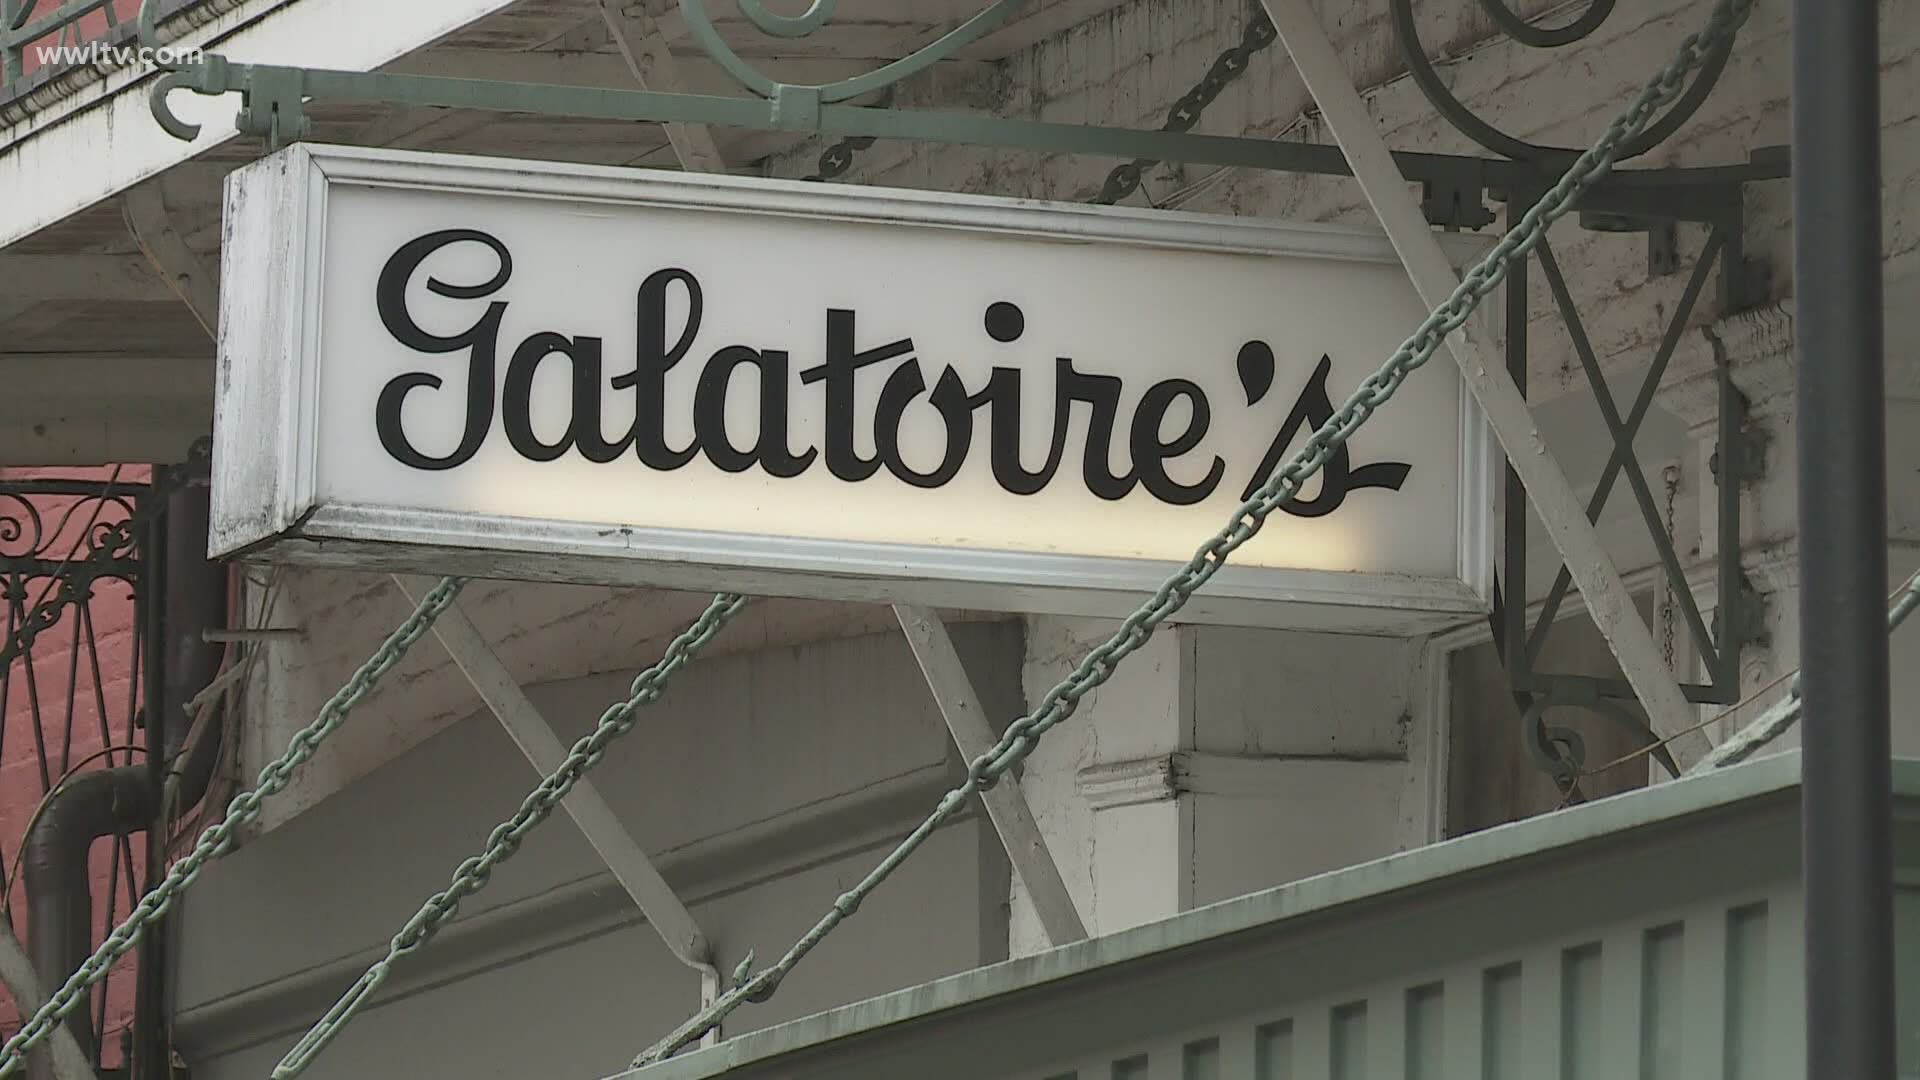 Already dealing with health concerns from the COVID pandemic, Galatoire’s restaurant in New Orleans is now reportedly dealing with cases of Hepatitis A.